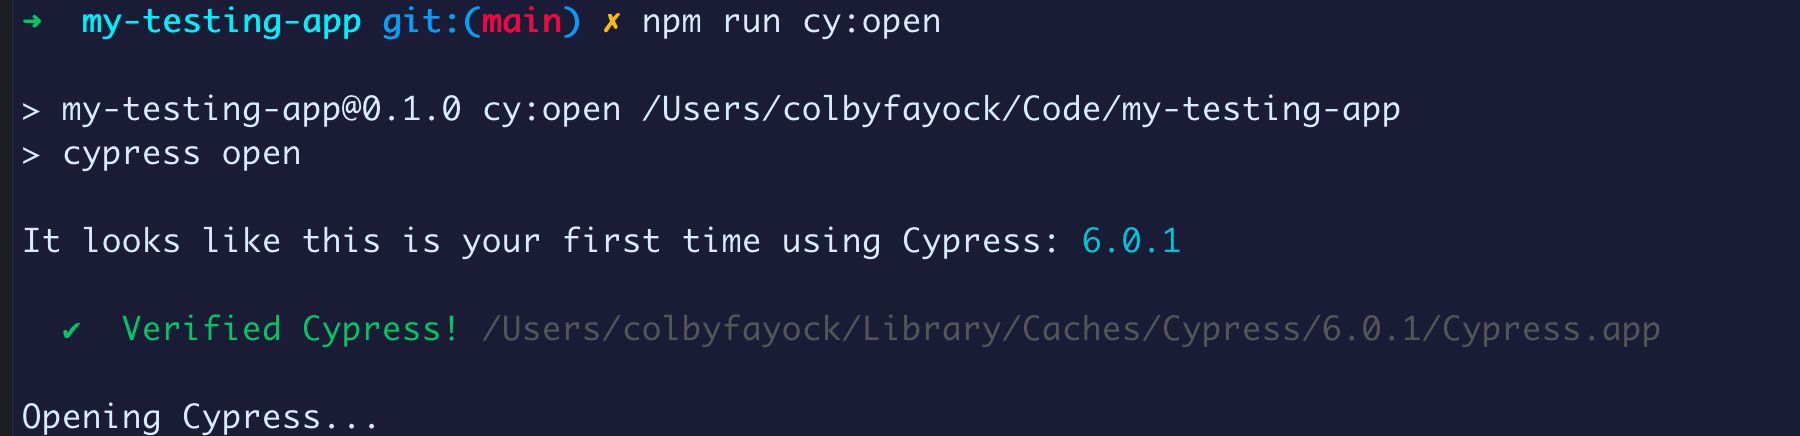 opening-cypress-in-terminal